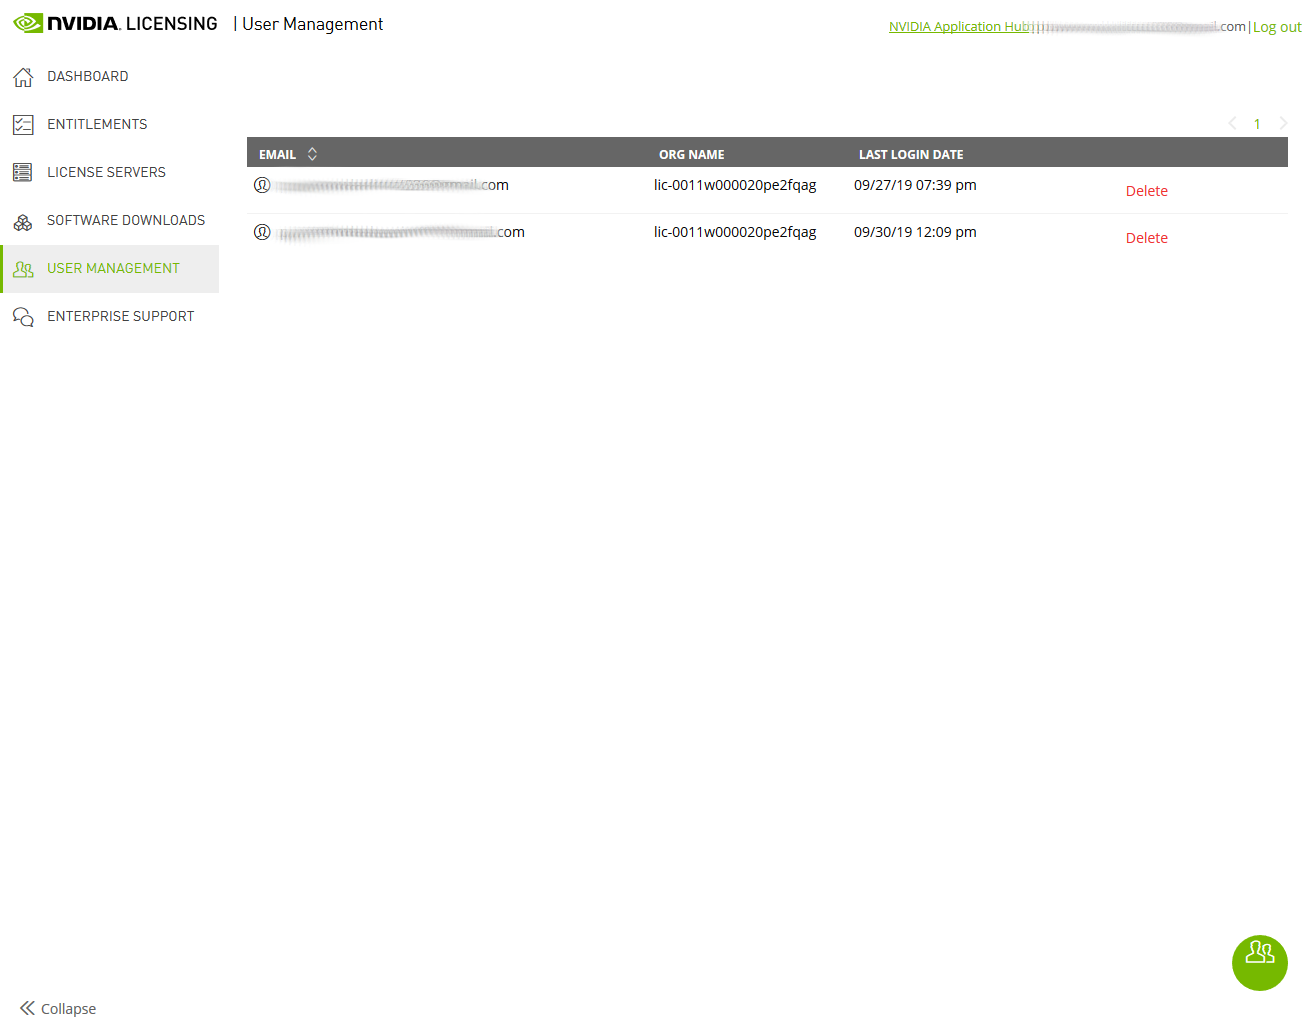 Screen capture showing the USER MANAGEMENT page with more than one user